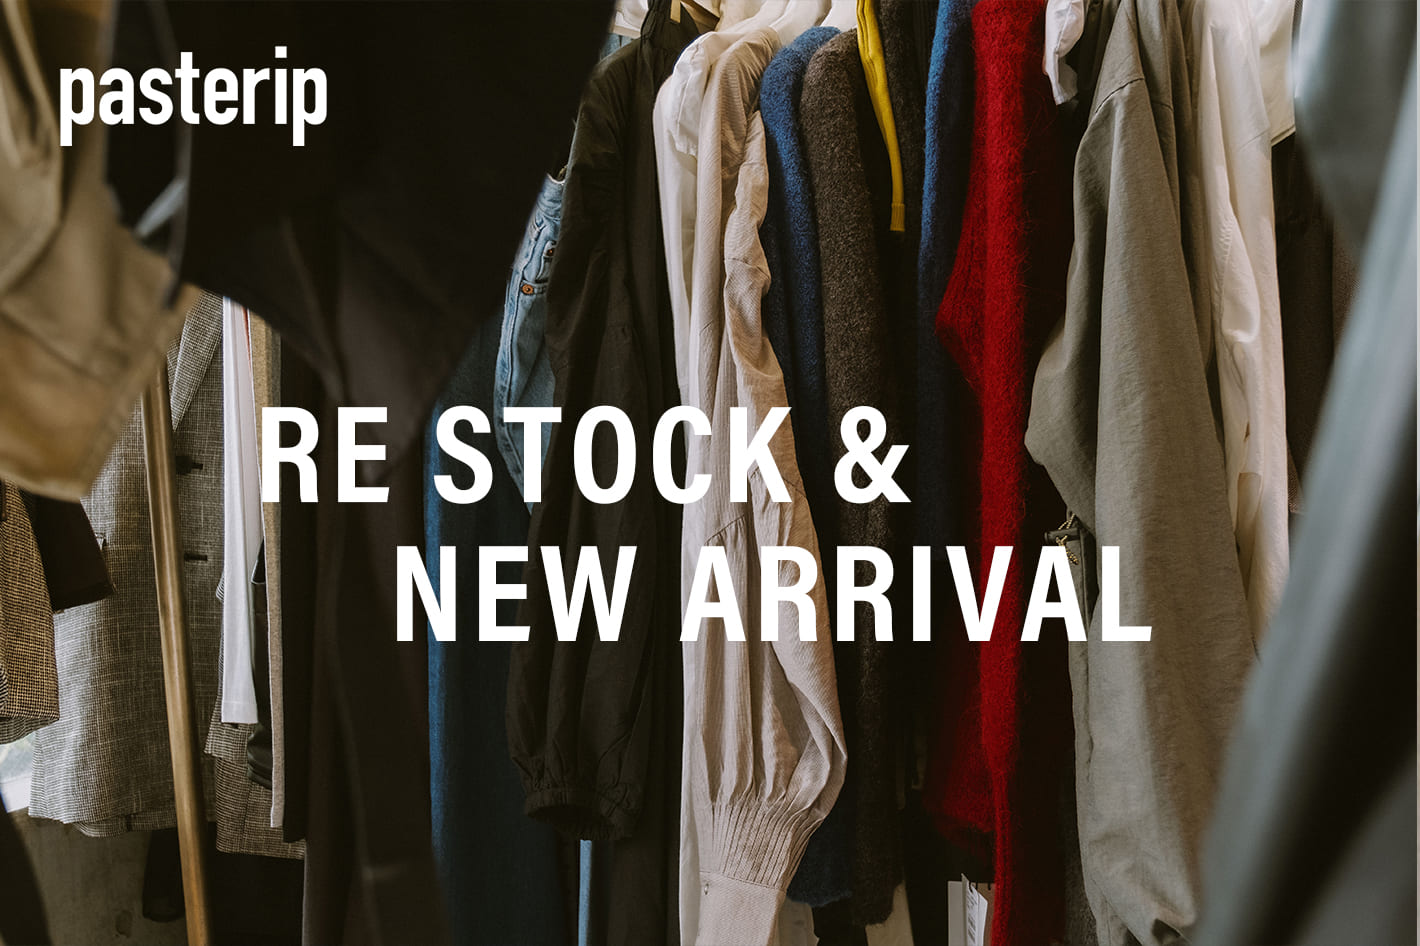 Pasterip Re stock & New arrival item lineup.